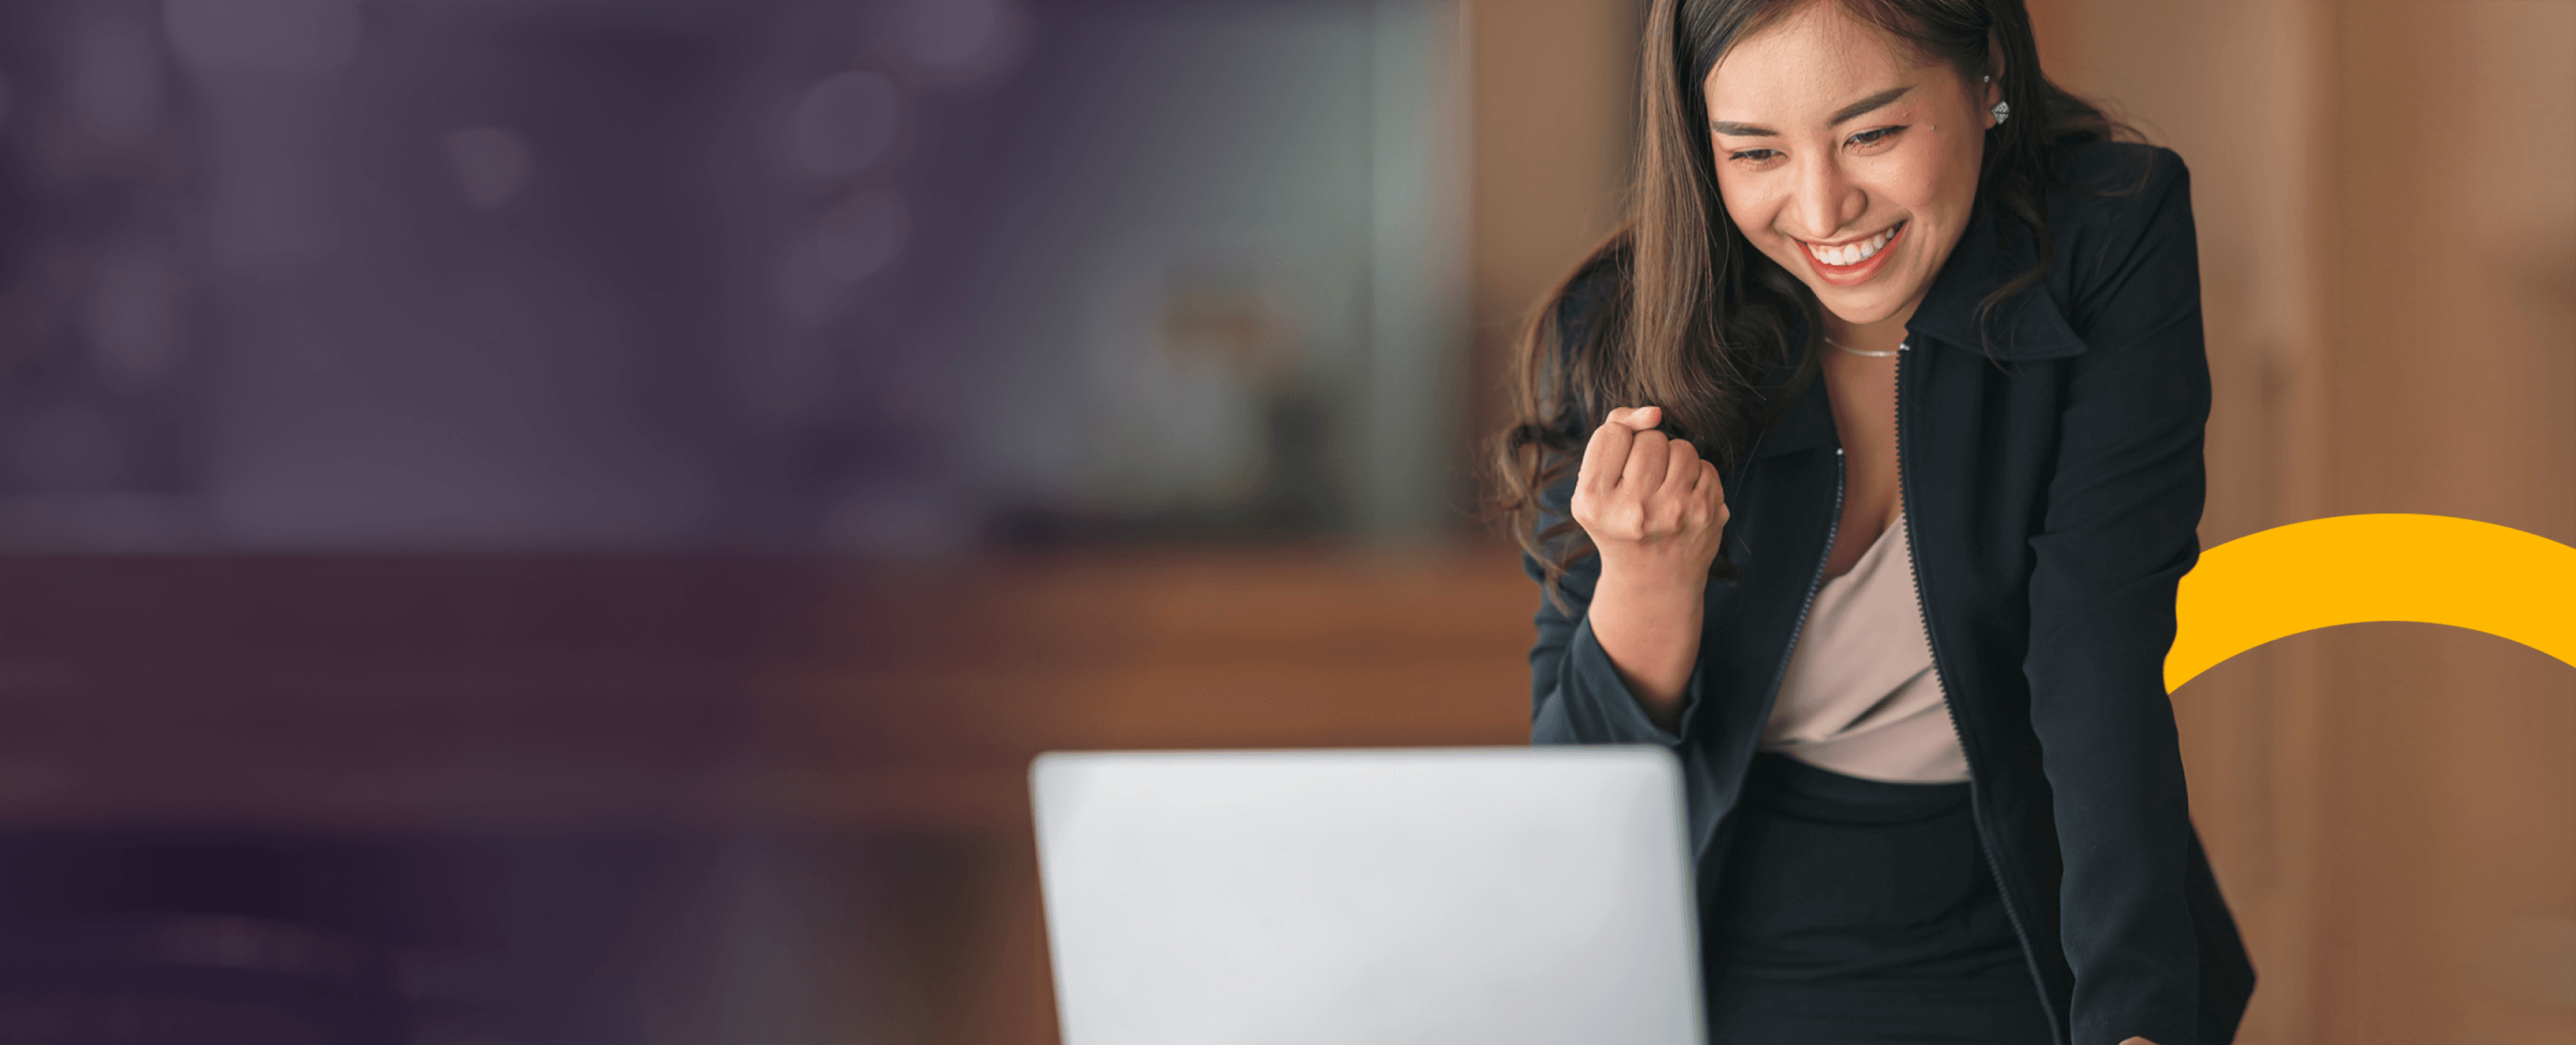 Woman celebrating as she looks at laptop